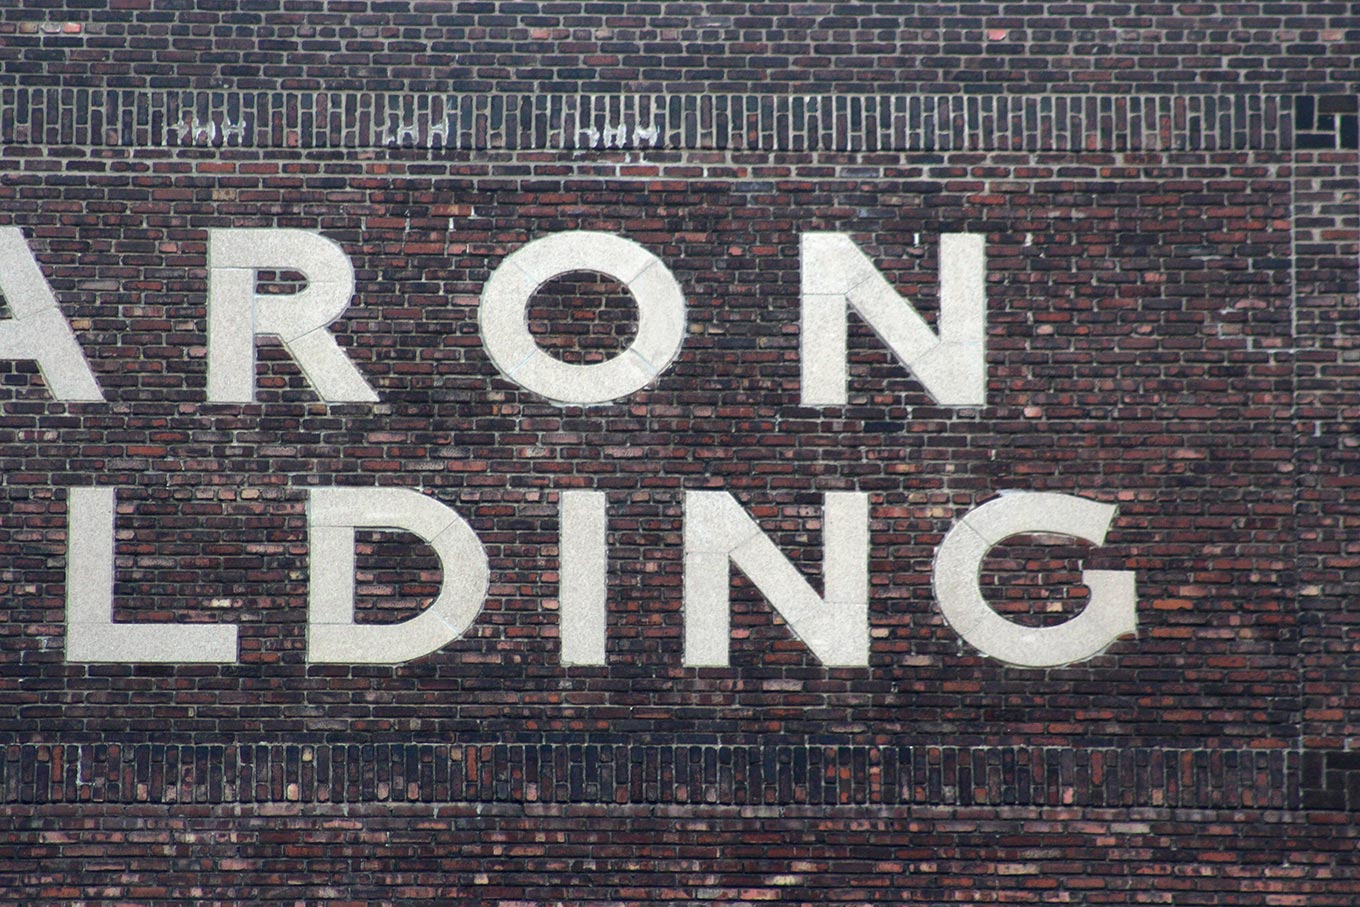 Inlaid limestone lettering on the side of the Caron Building